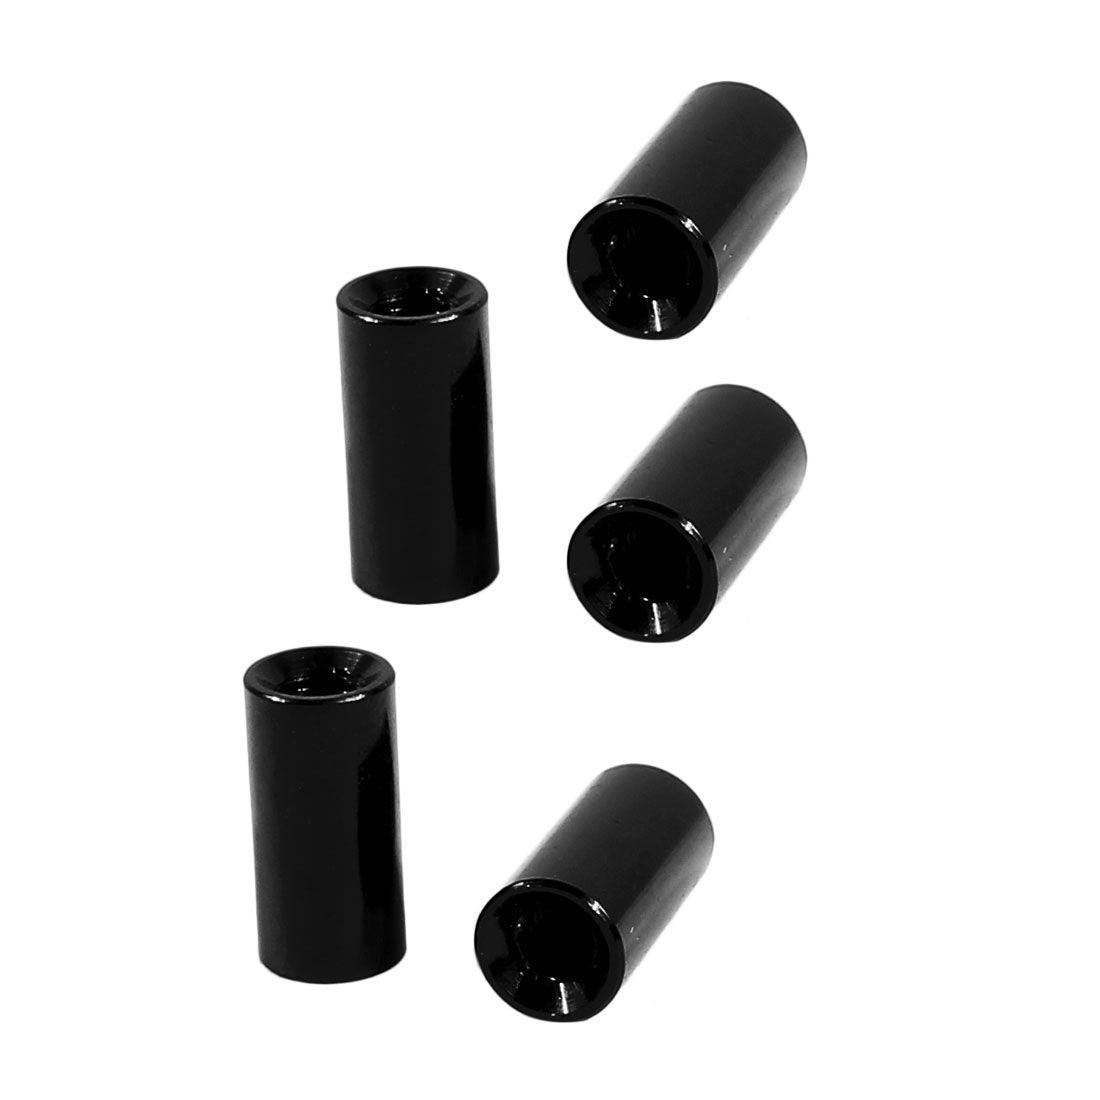 uxcell Uxcell 5Pcs M3 x 10mm Round Aluminum Column Alloy Standoff Spacer Stud Fastener for Quadcopter Black